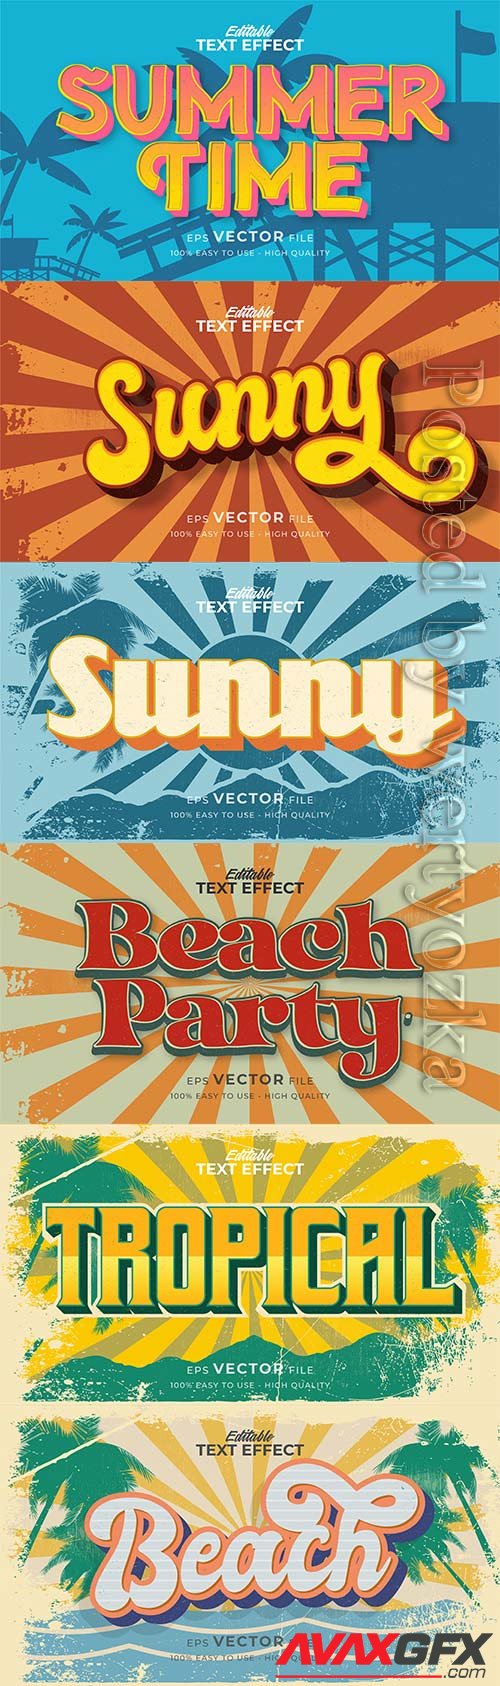 Text style effect, retro summer text in grunge style vol 3